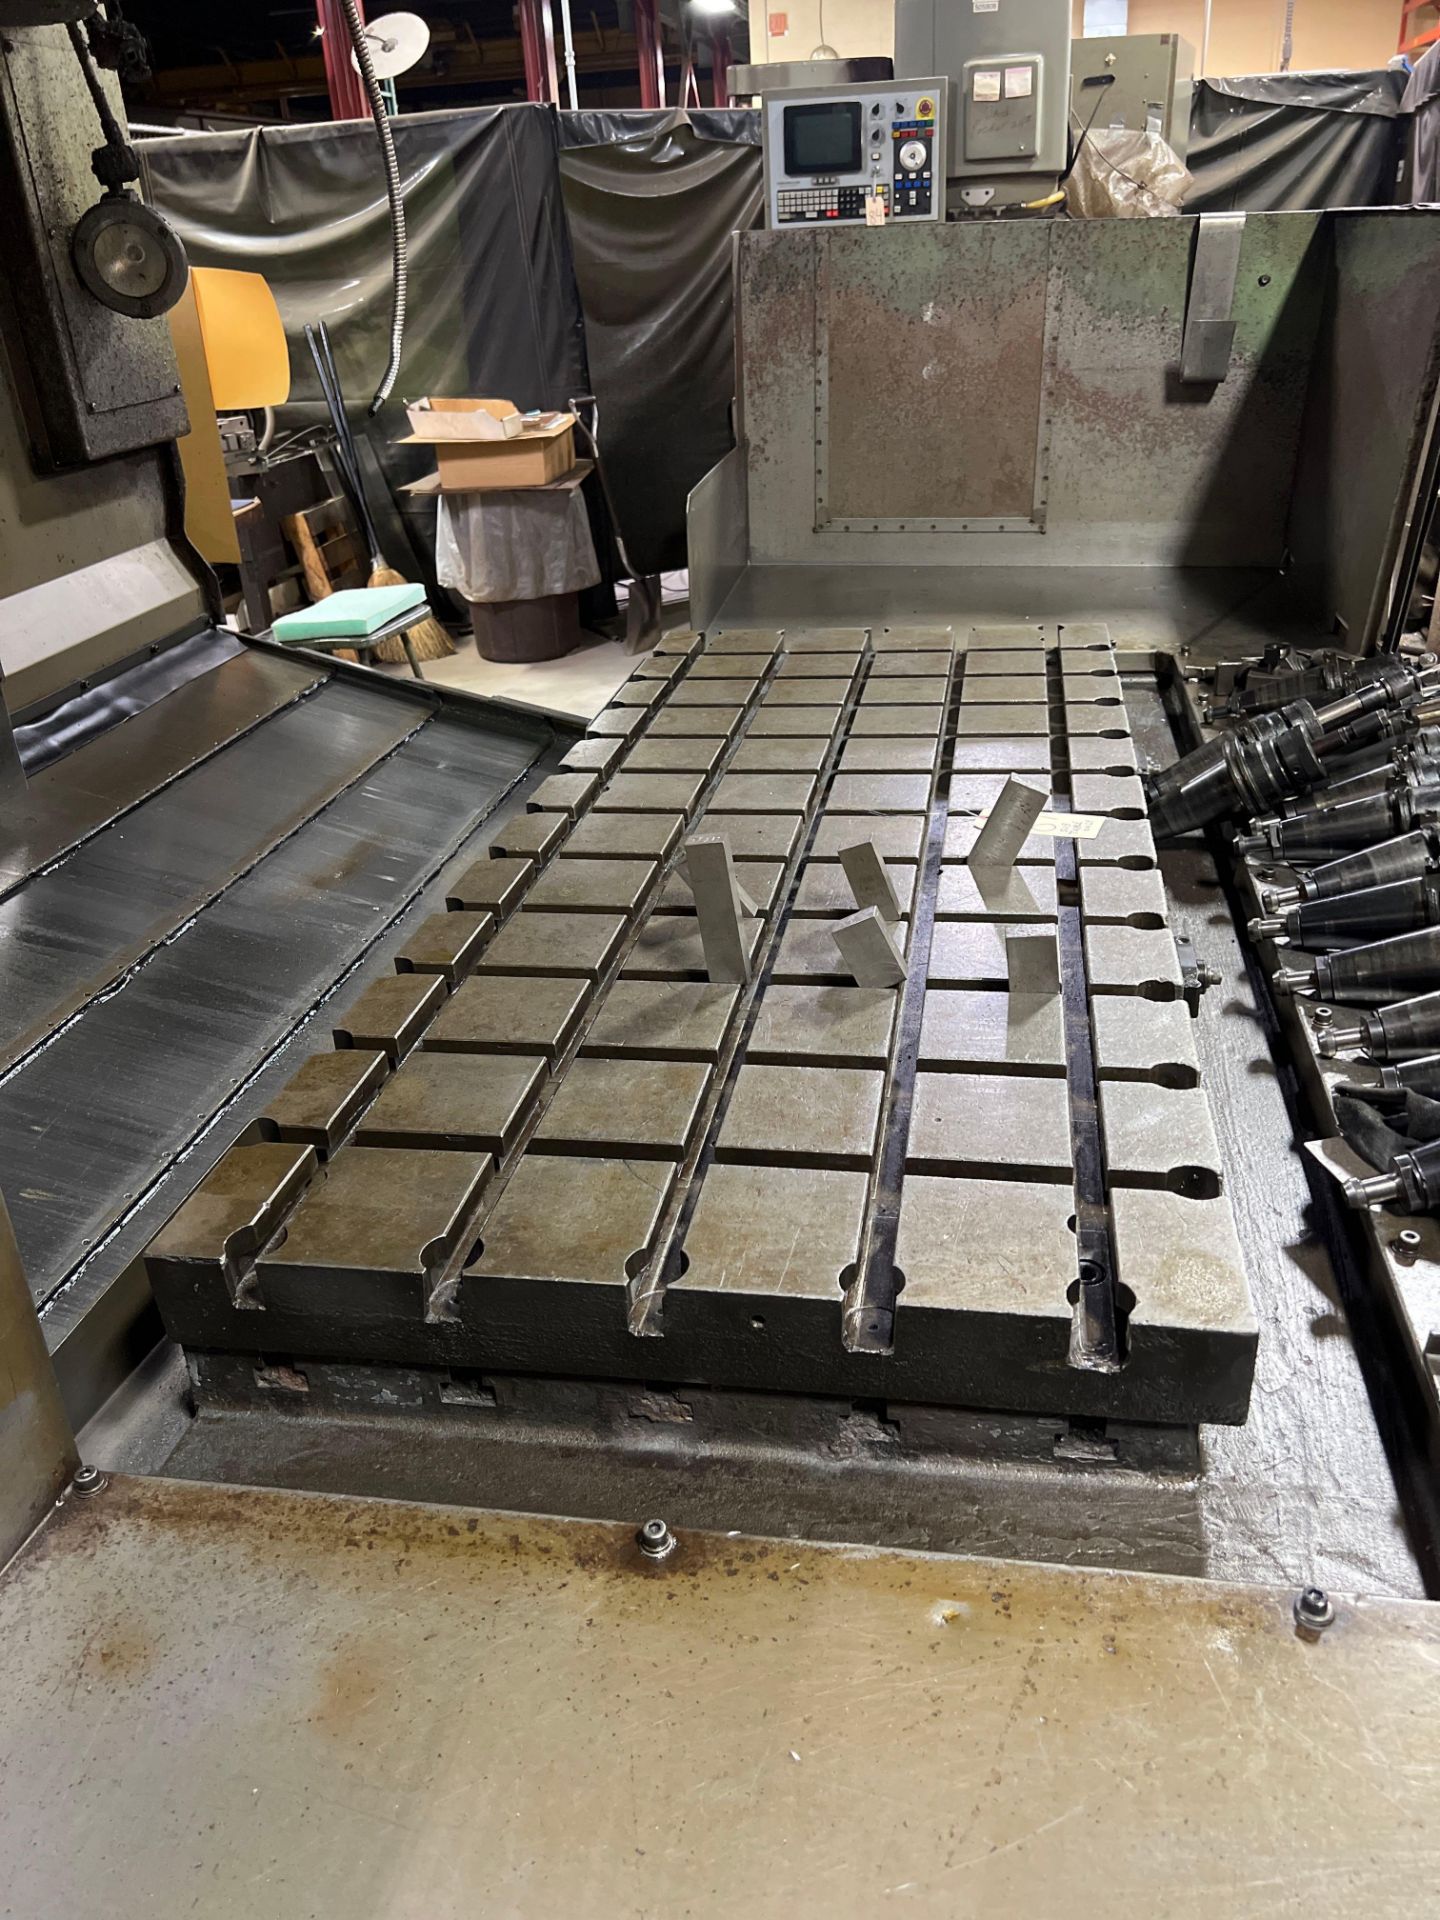 25-7/8 x 60-7/8 x 2-3/4 Approx T-Slotted Machine Sub Plate - Image 2 of 3